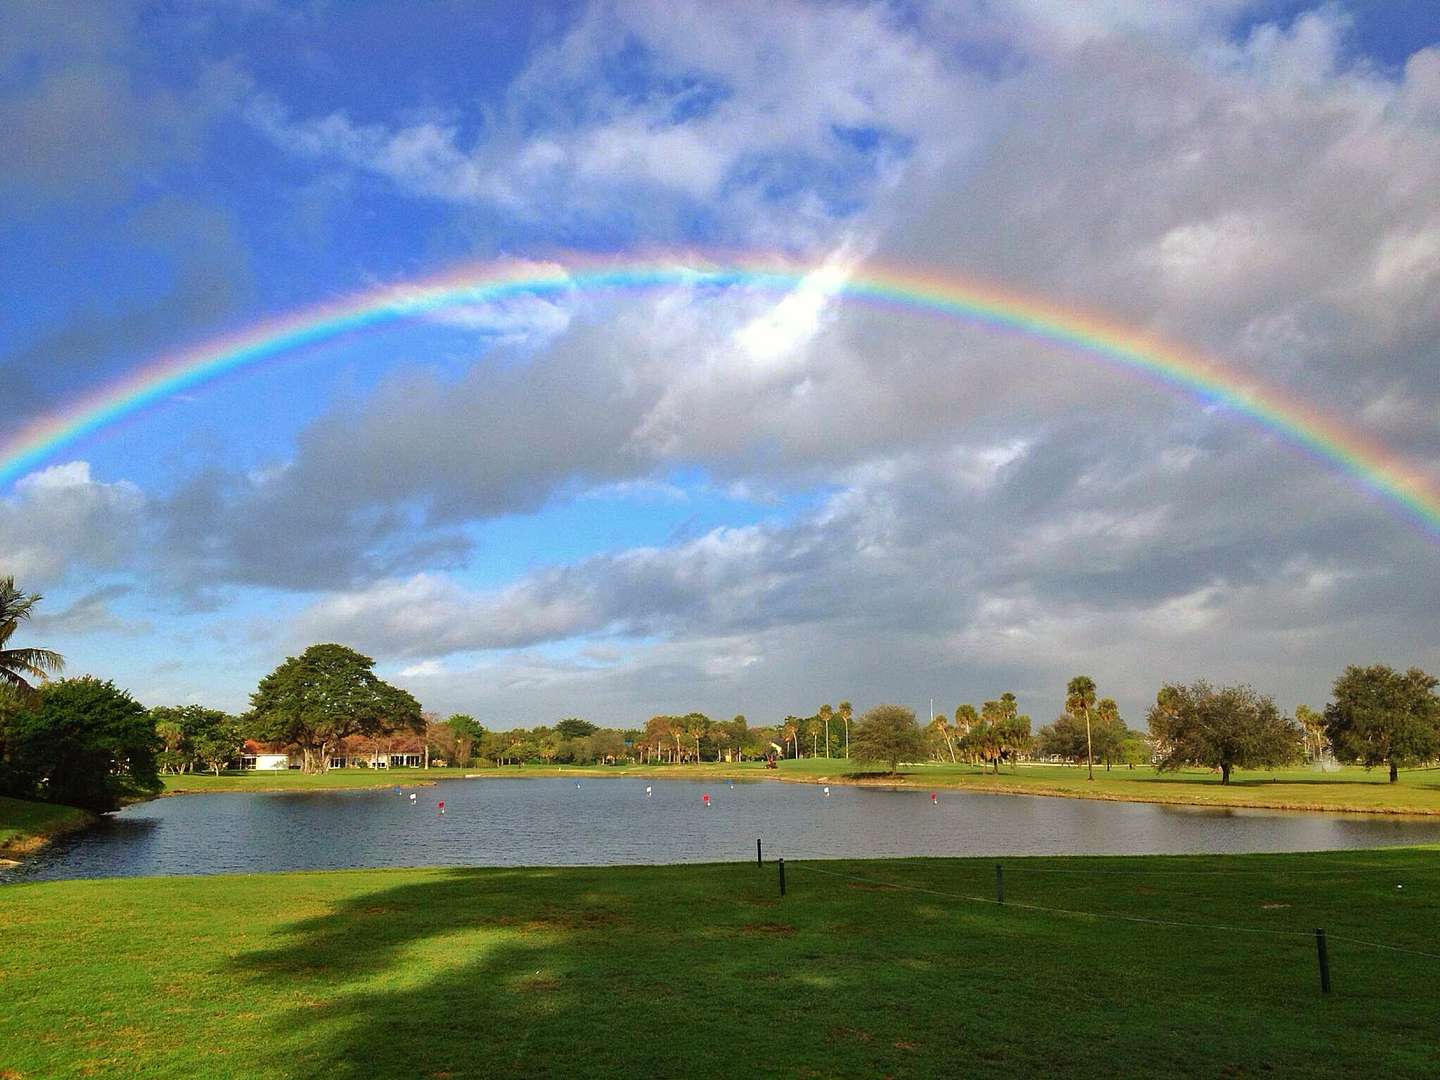 There is a large lake and a rainbow vista on the golf course